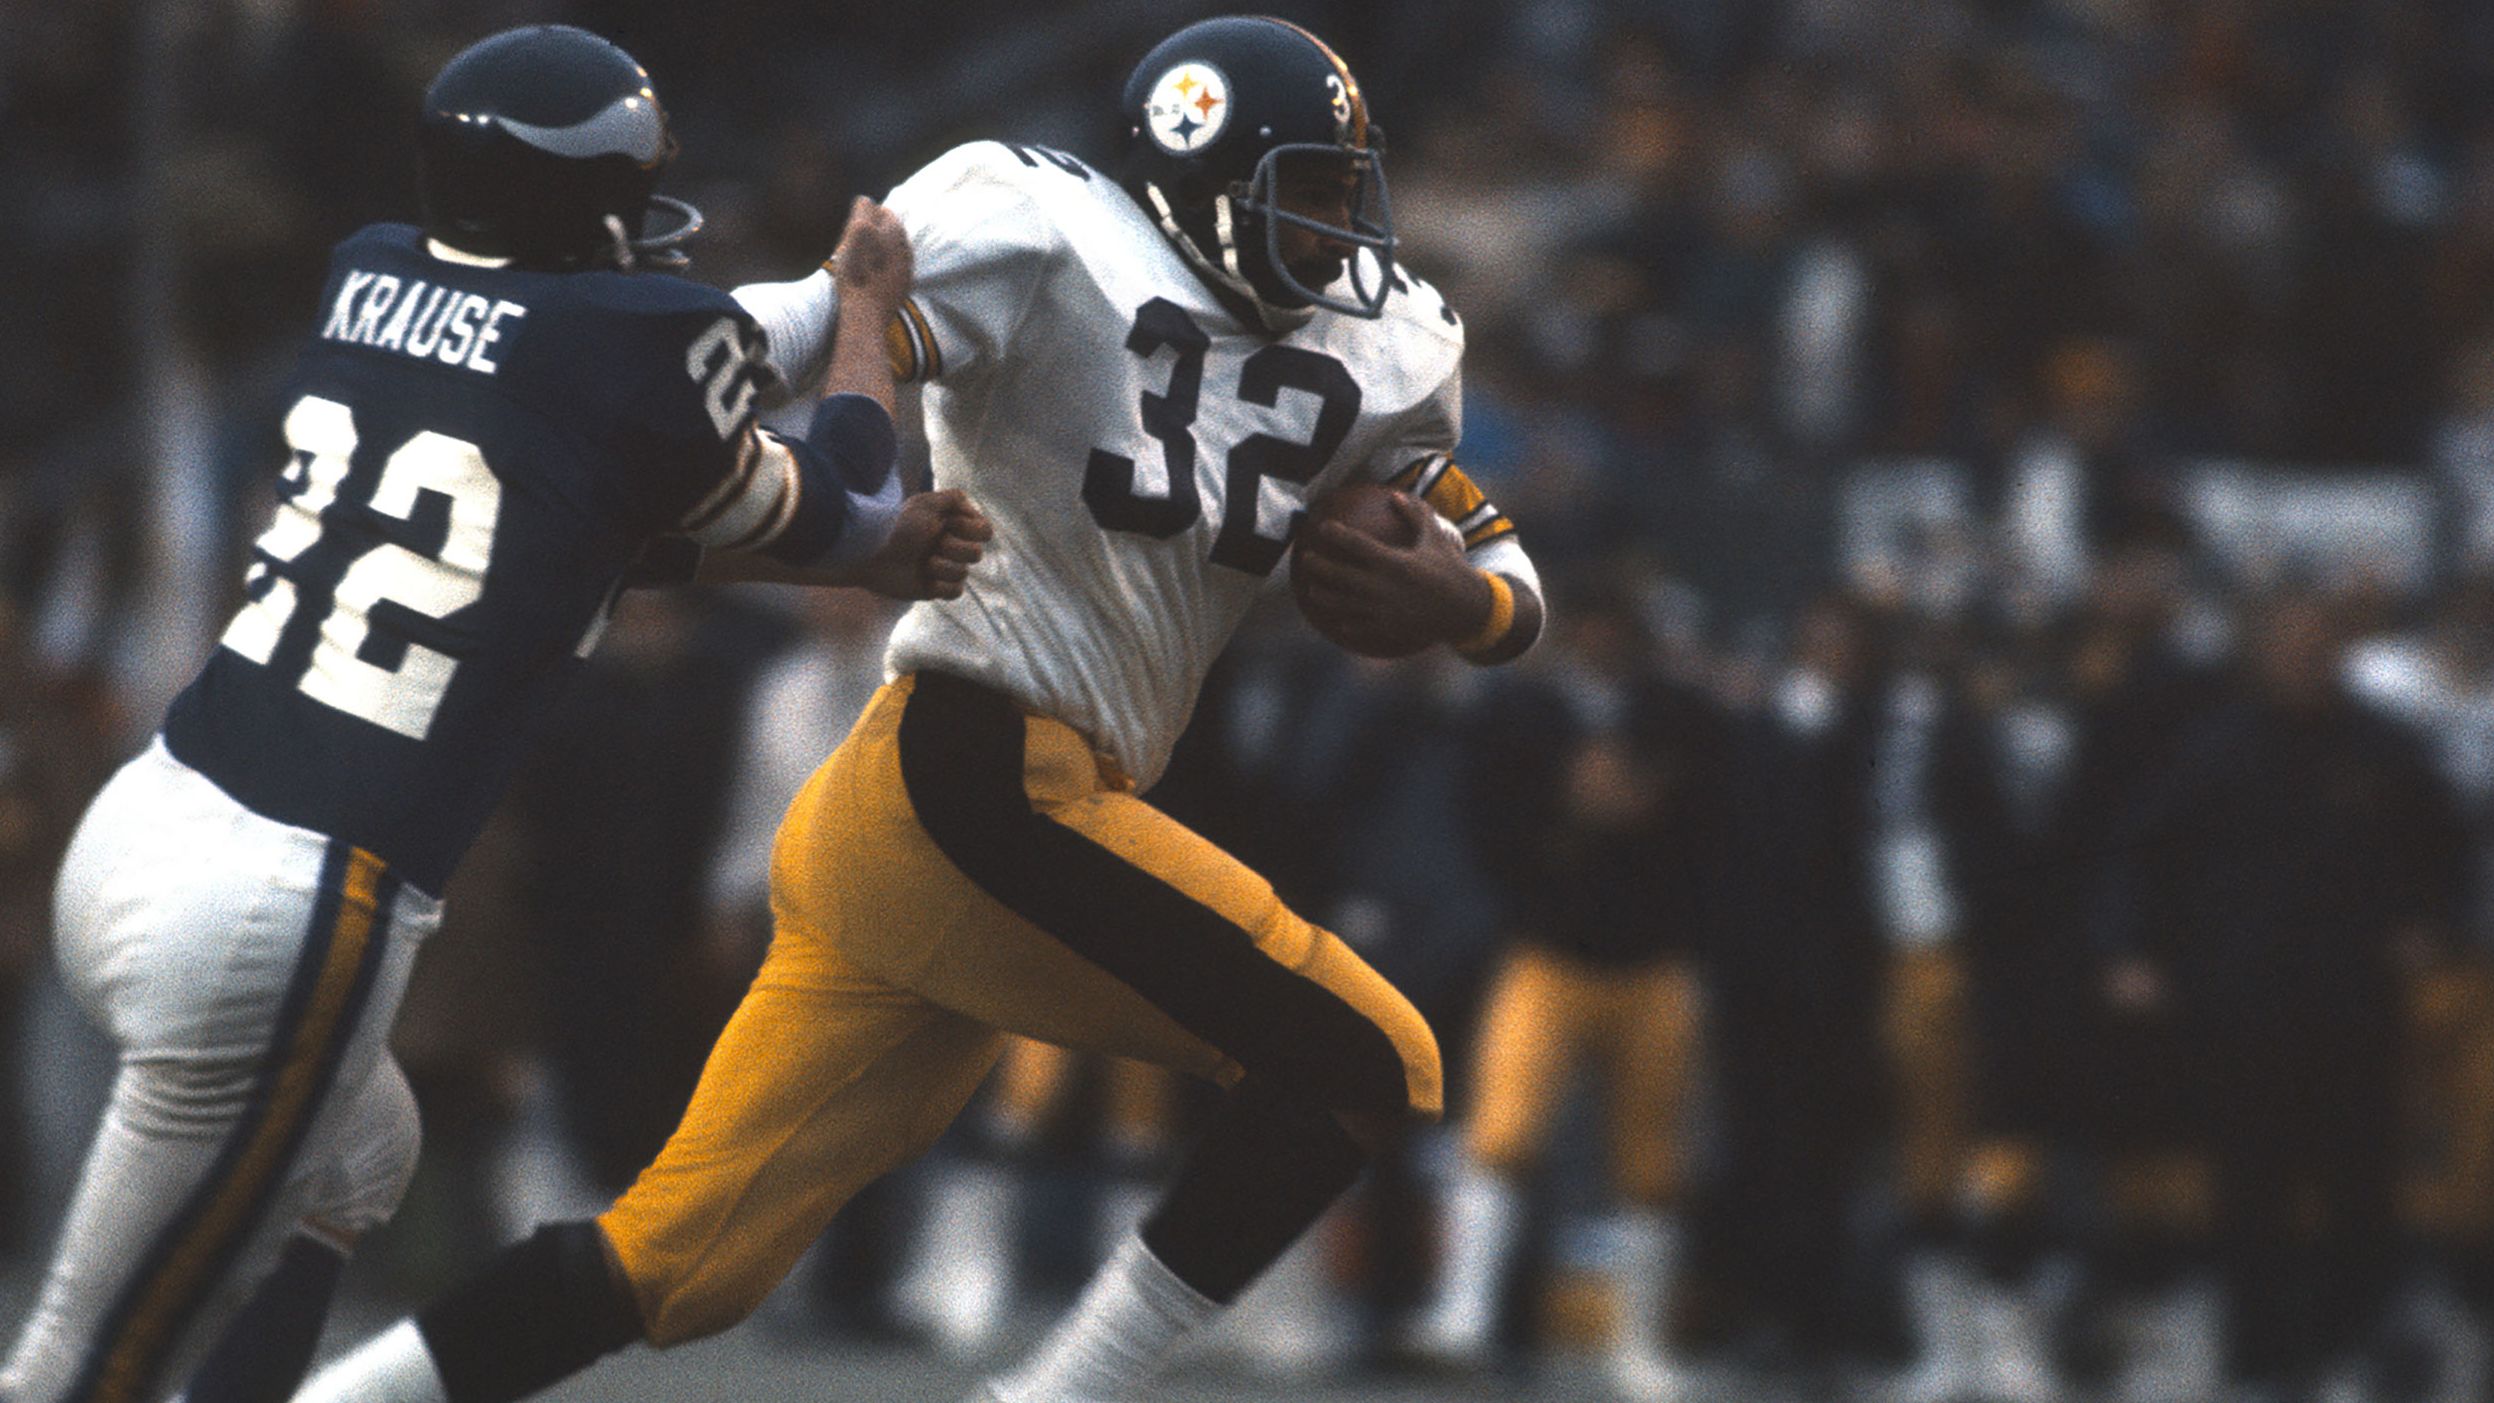 <strong>Super Bowl IX (1975):</strong> Pittsburgh Steelers running back Franco Harris fights off Minnesota defender Paul Krause during Pittsburgh's 16-6 victory in Super Bowl IX. Harris ran for 158 yards and a touchdown on his way to winning MVP.